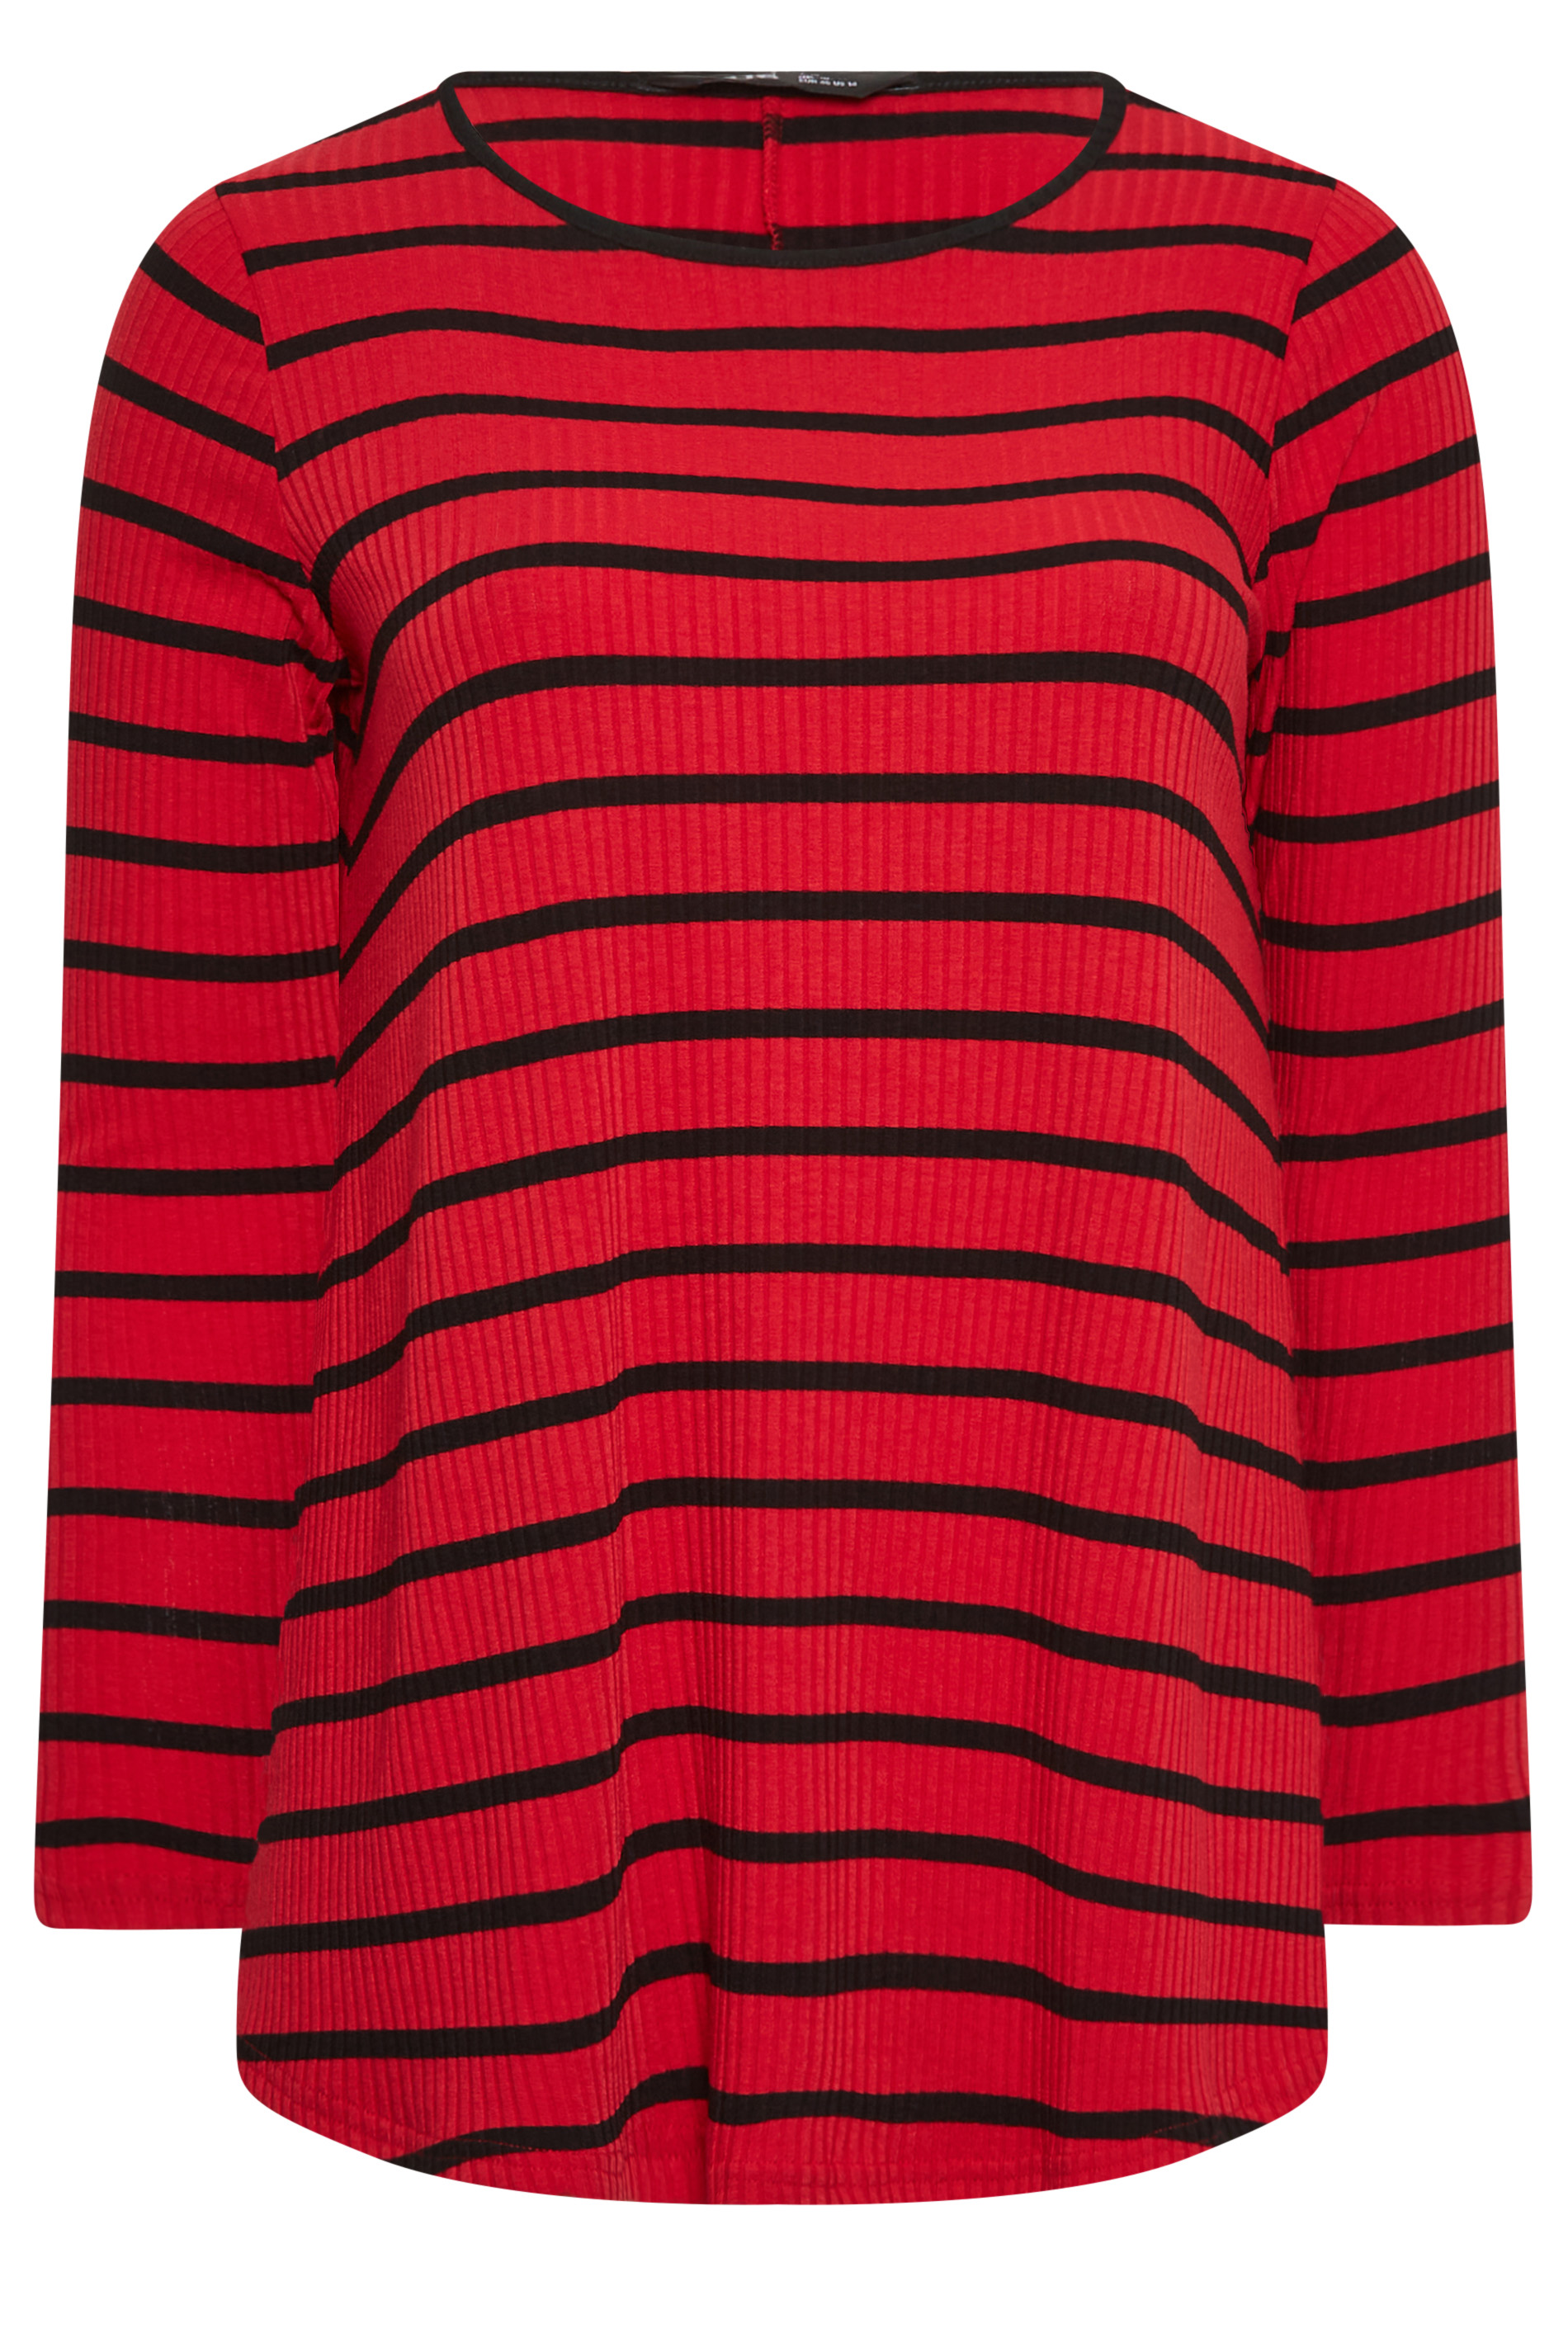 YOURS Plus Size Red Stripe Ribbed | Top Swing Yours Clothing